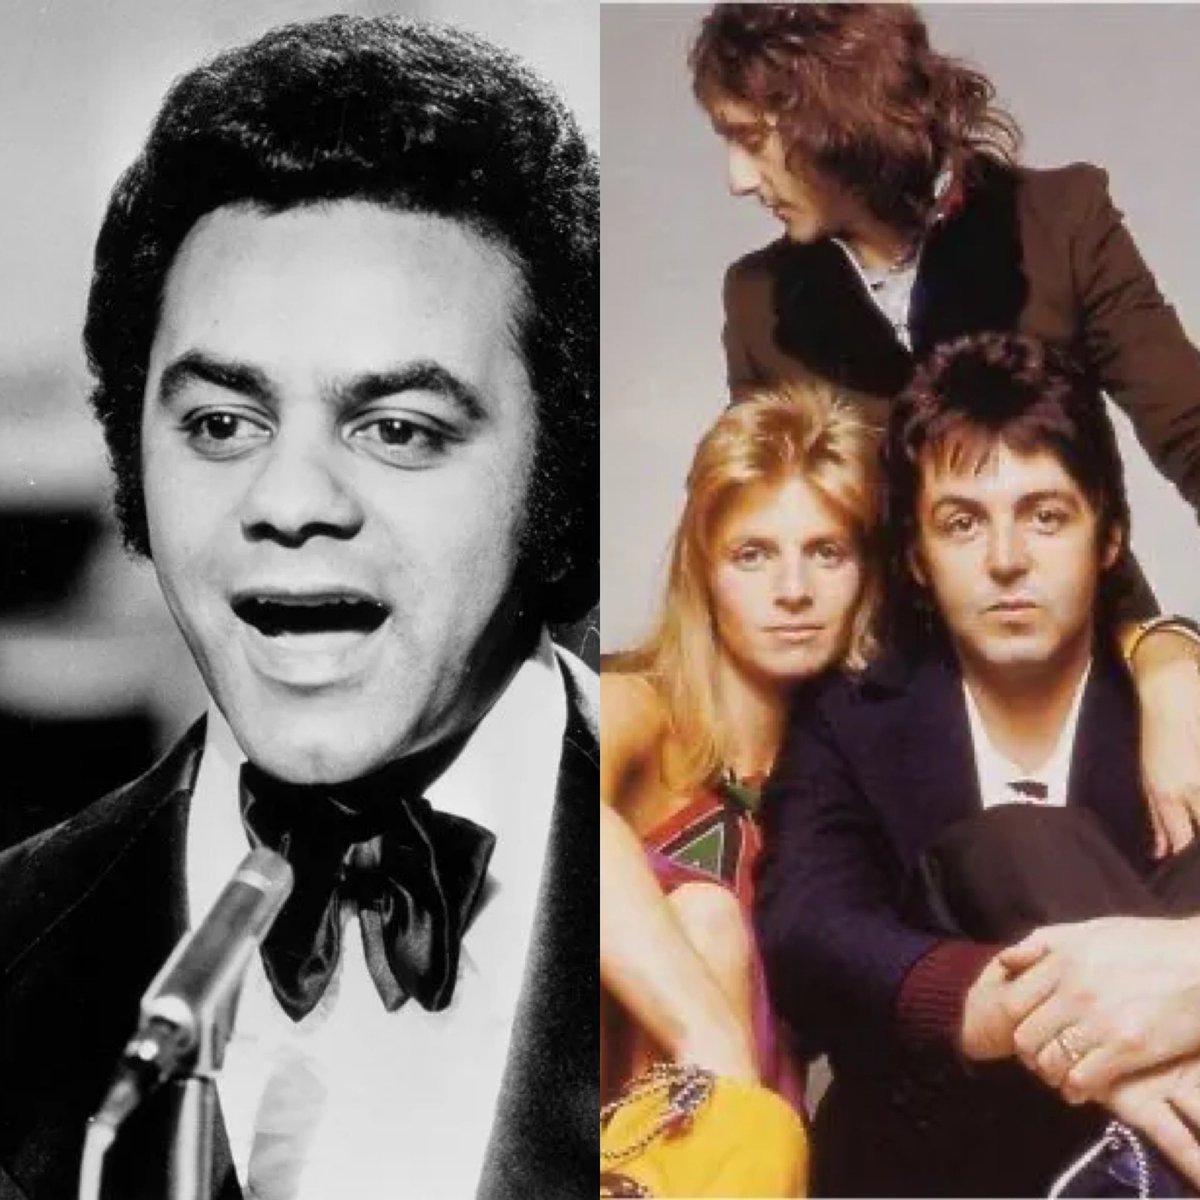 The festive chart-topper in 1976 was easy listening crooner Johnny Mathis’s When a Child is Born (Soleado). A year later, Wings had the biggest-selling single of the 70s with Mull of Kintyre/Girls’ School.
#everyuknumber1 #pop #whenachildisborn #mullofkintyre #christmasnumberone